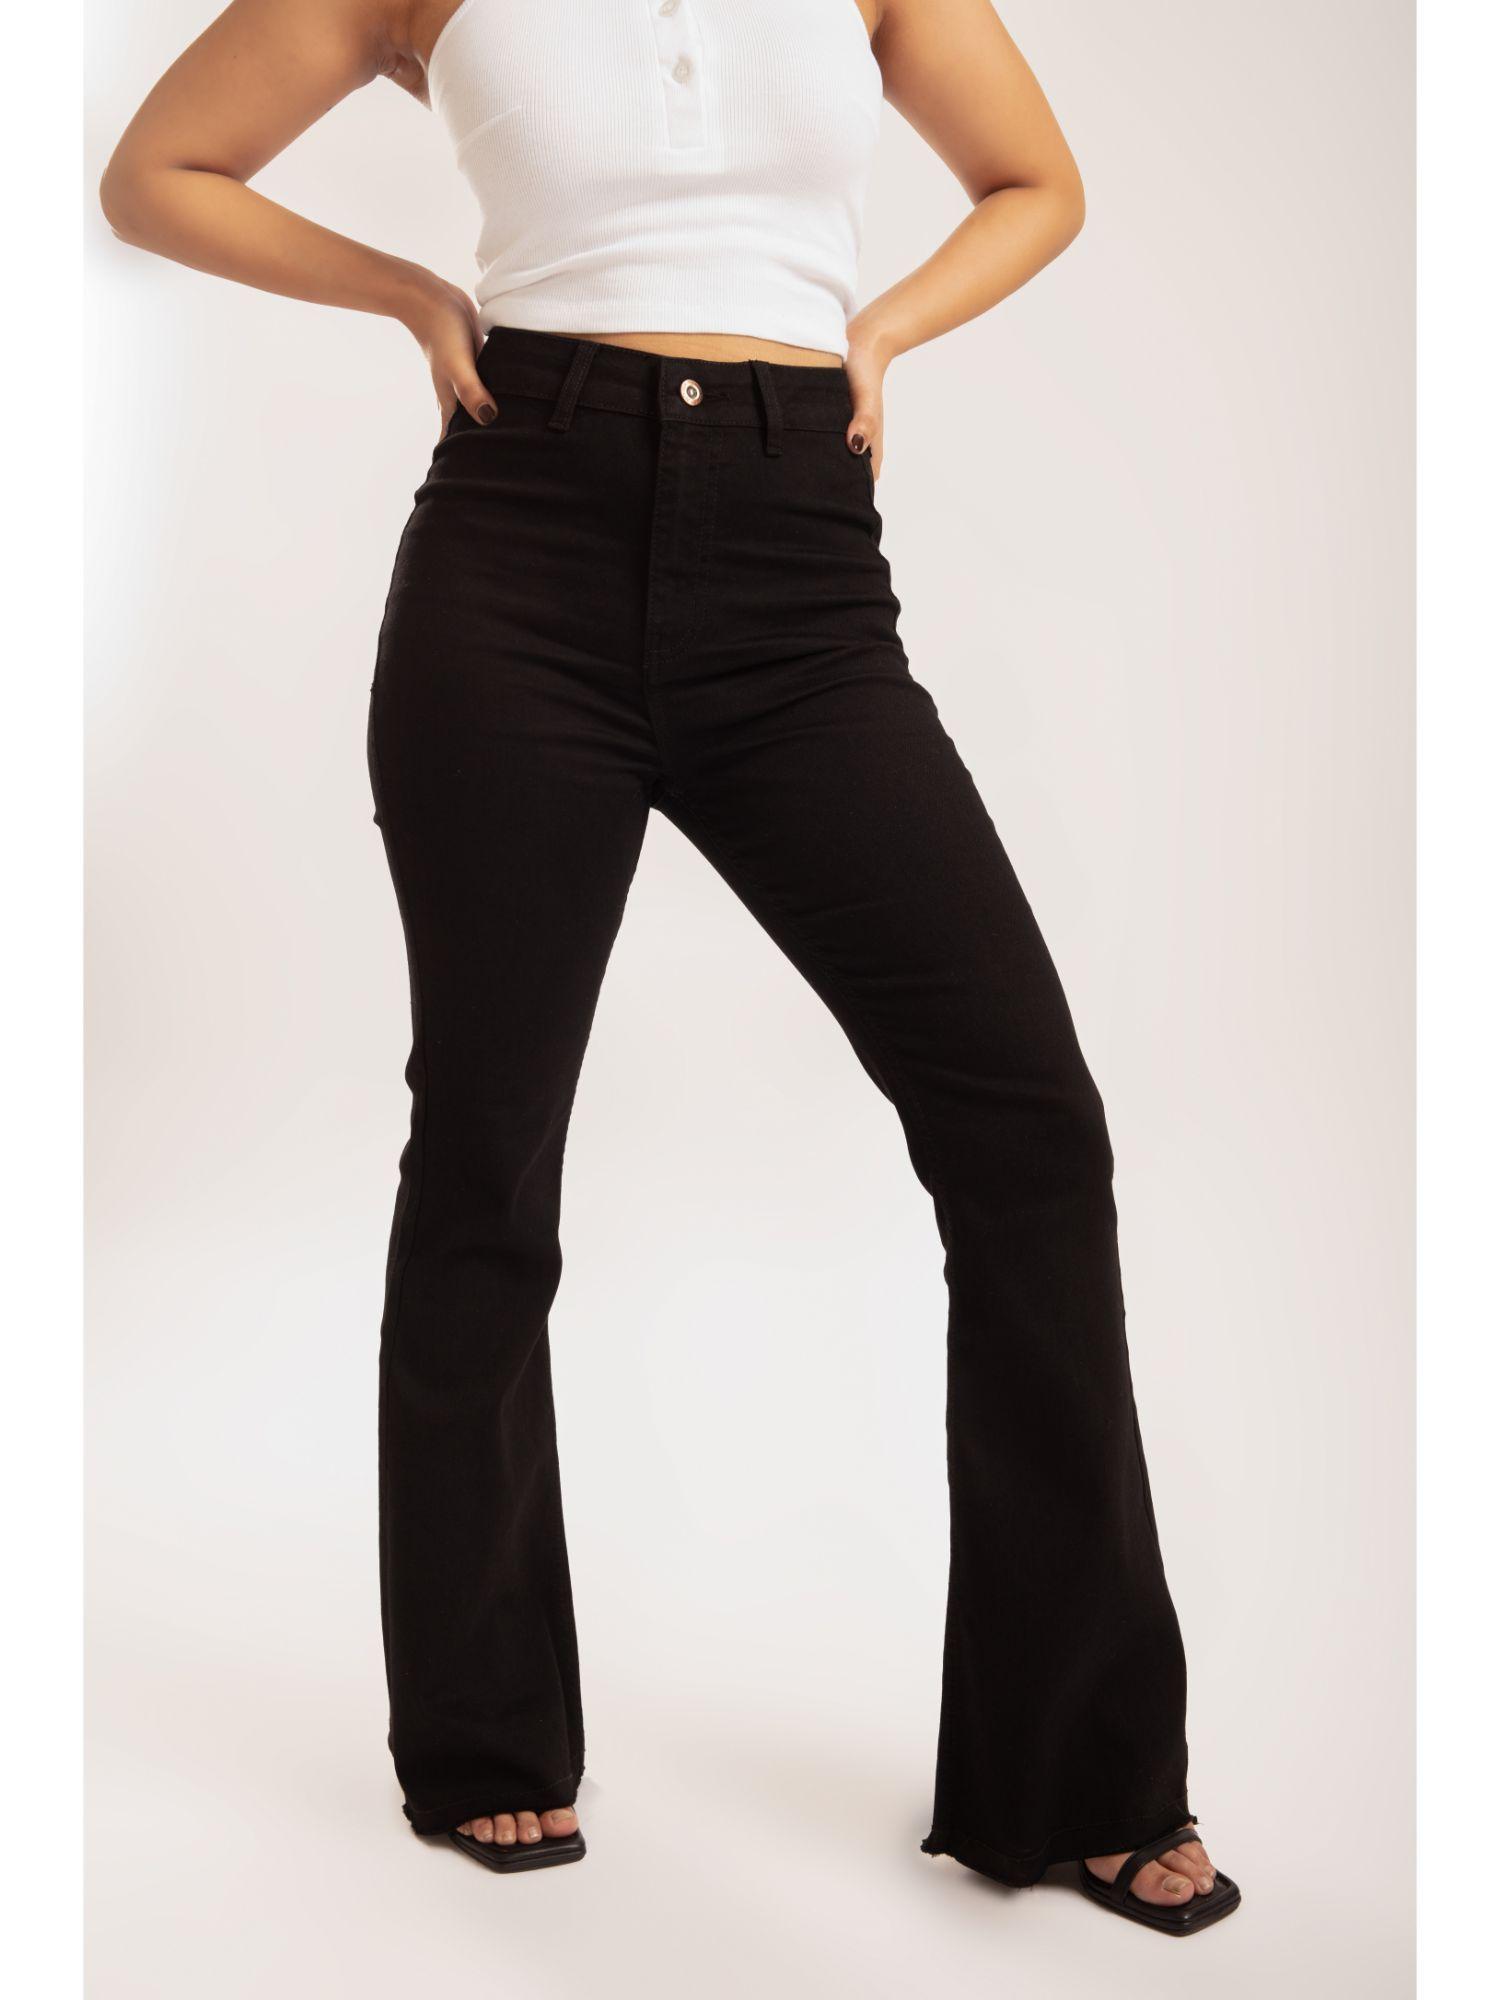 black ultra high rise flare jeans